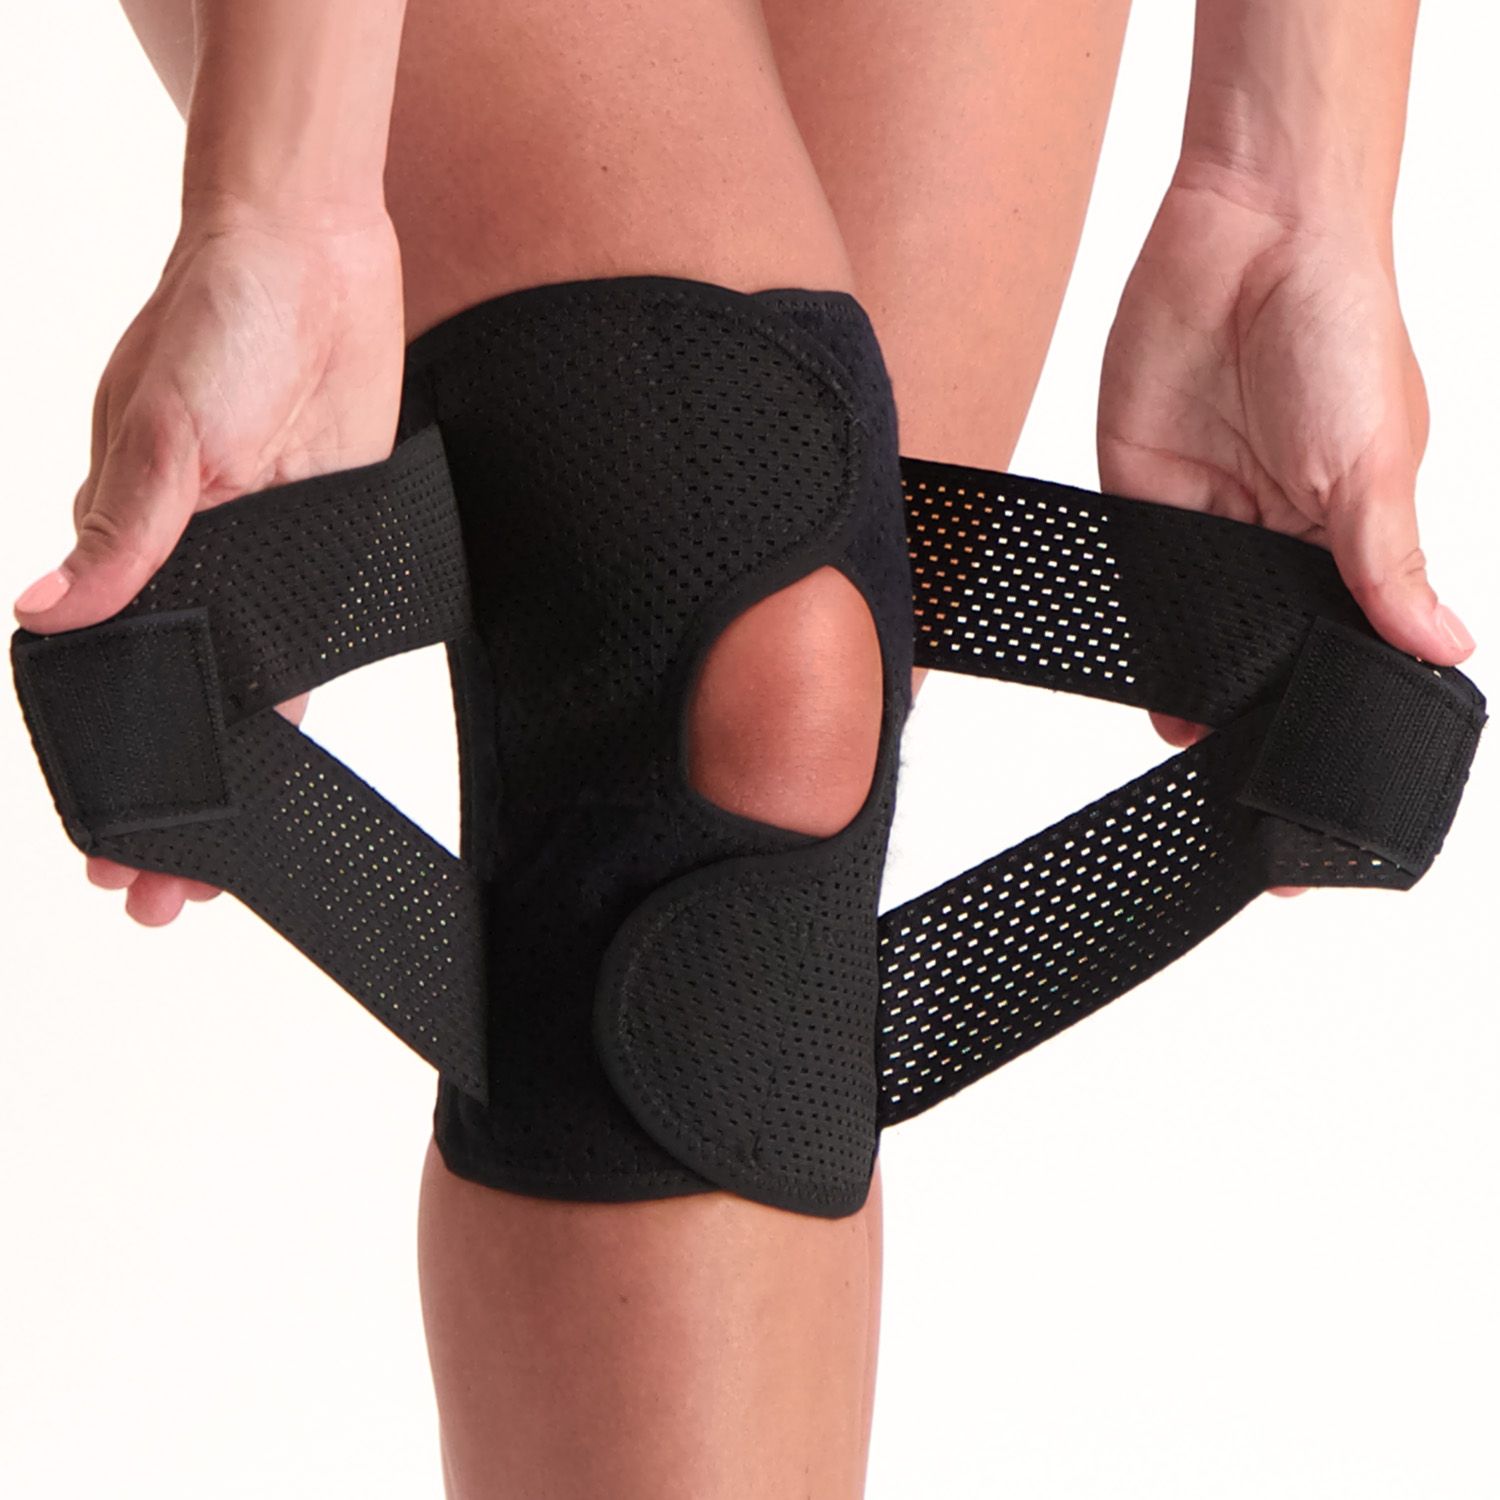 dunimed wrap knee support with busks straps